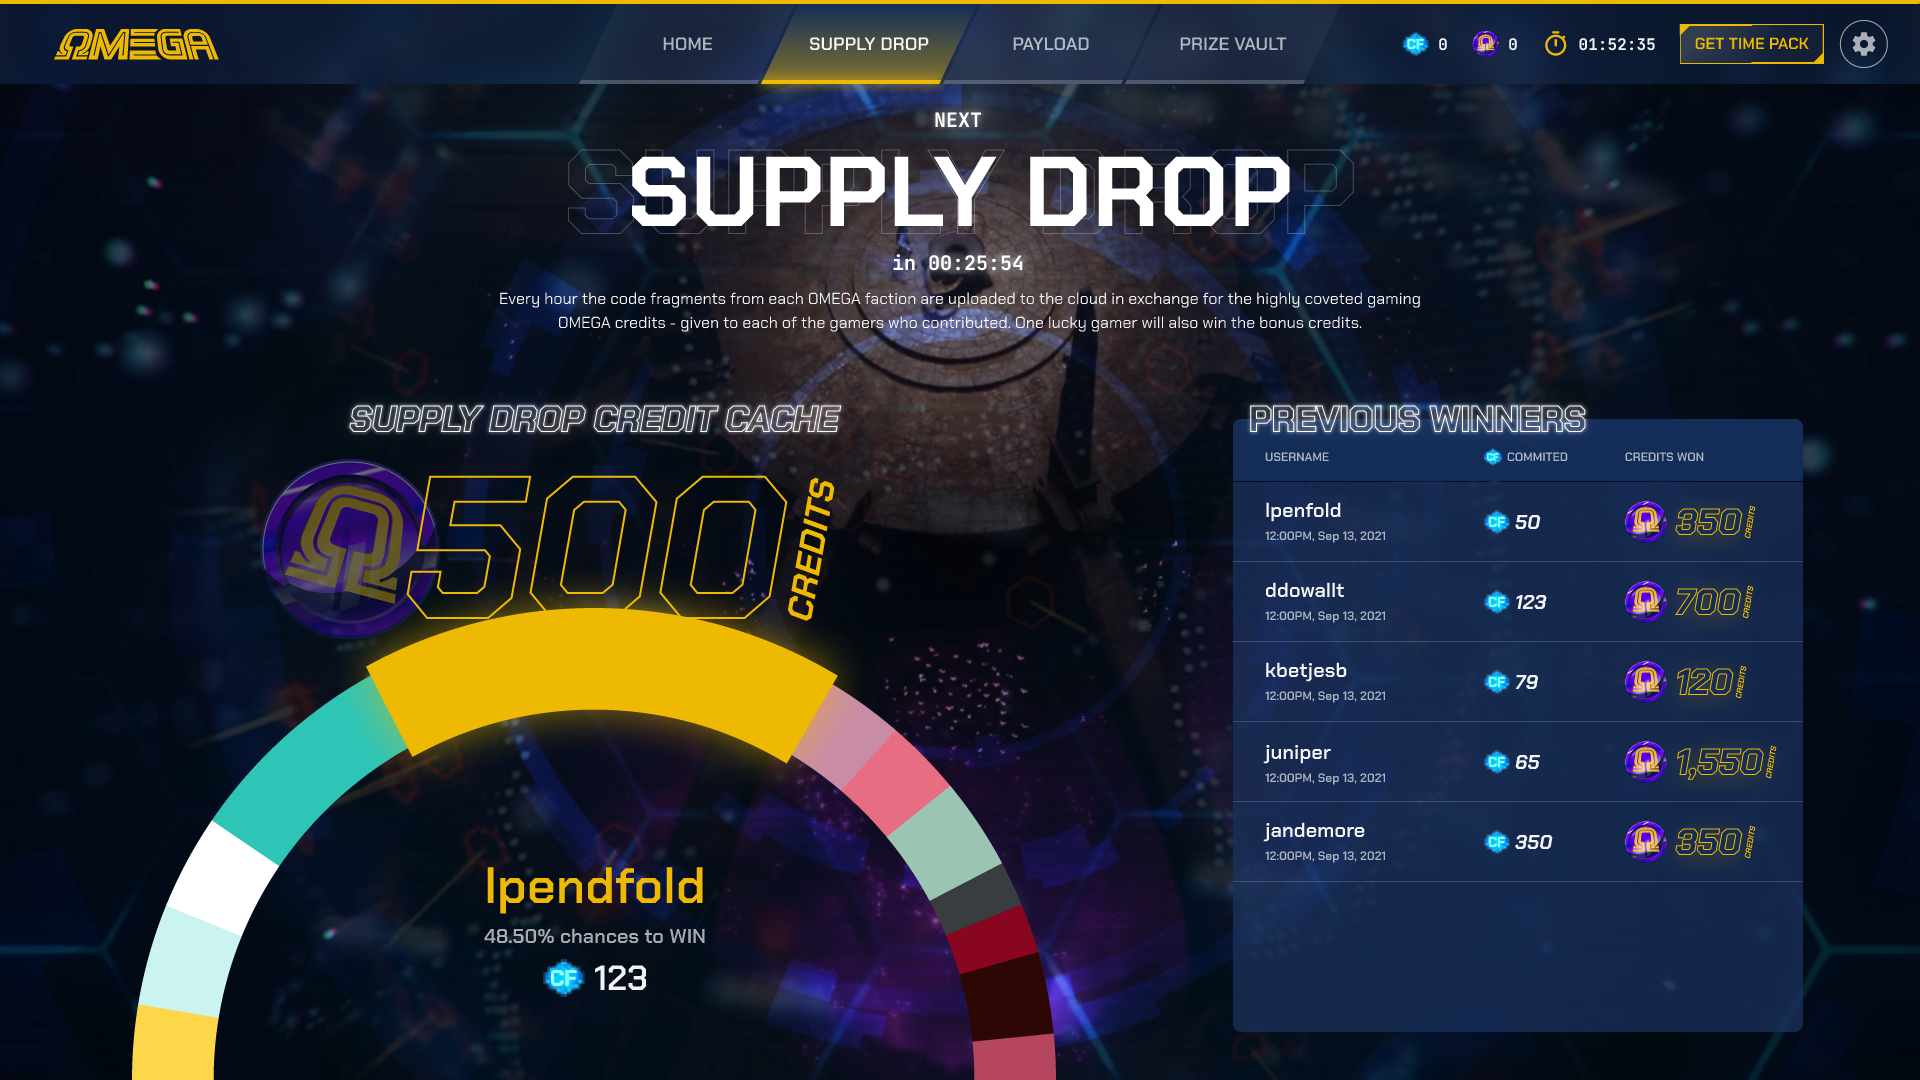 Screenshot of the OMEGA client that shows when is the next Supply Drop